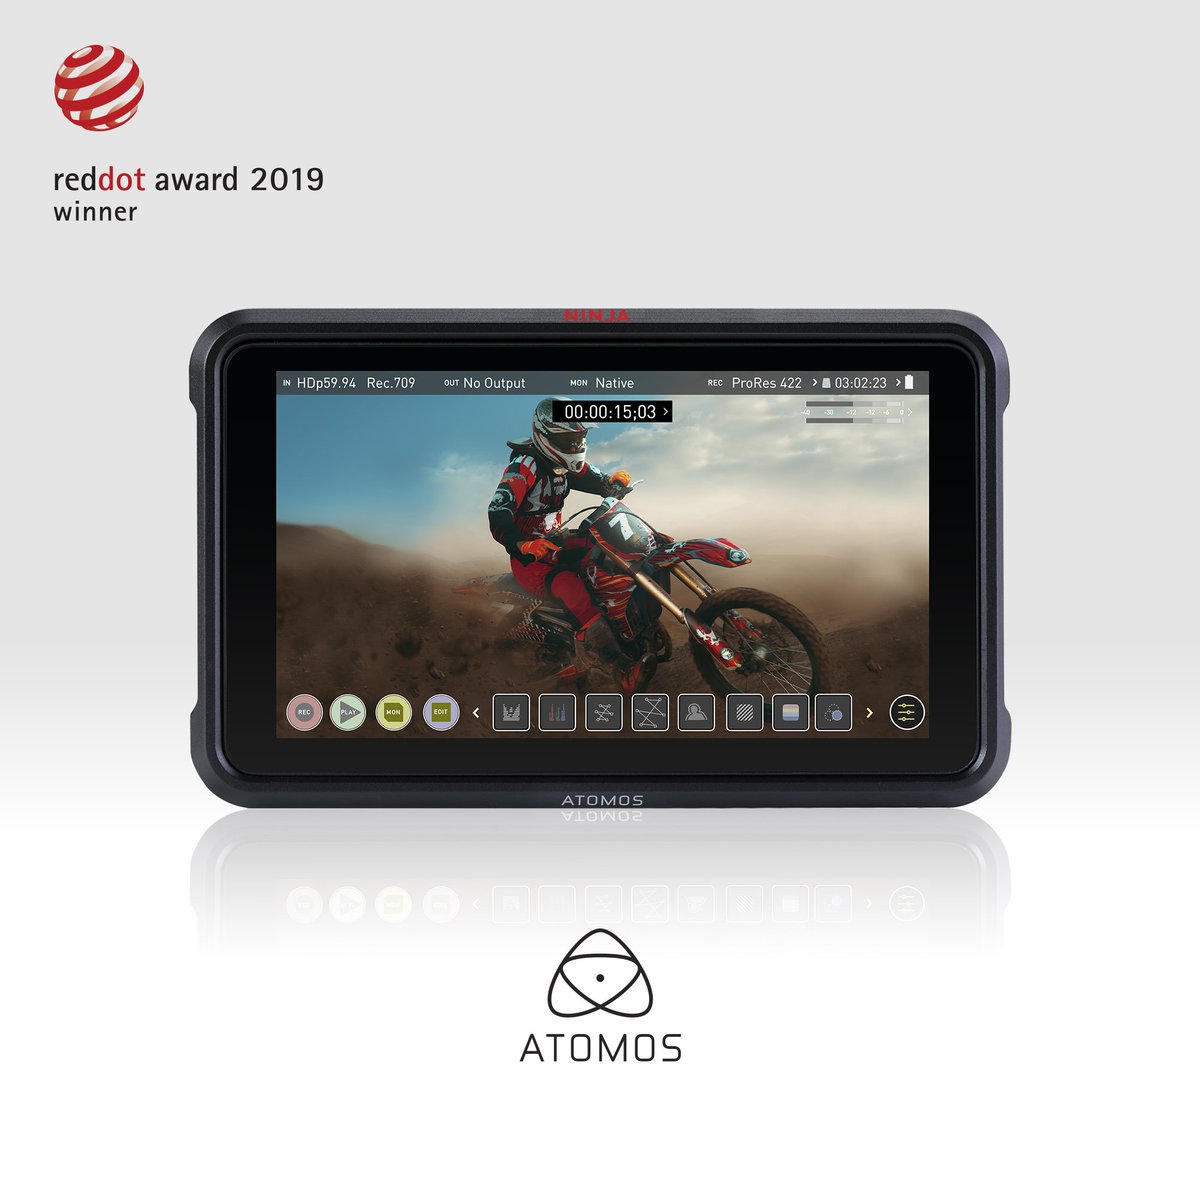 We are honoured to have received the prestigious 2019 Red Dot Award, recognising exceptional product design for the Atomos #NinjaV. 
We would like to thank the Atomos community for continued support.

atomos.com/ninjav

#reddotawards2019 #atomos #reddotwinner #reddotaward